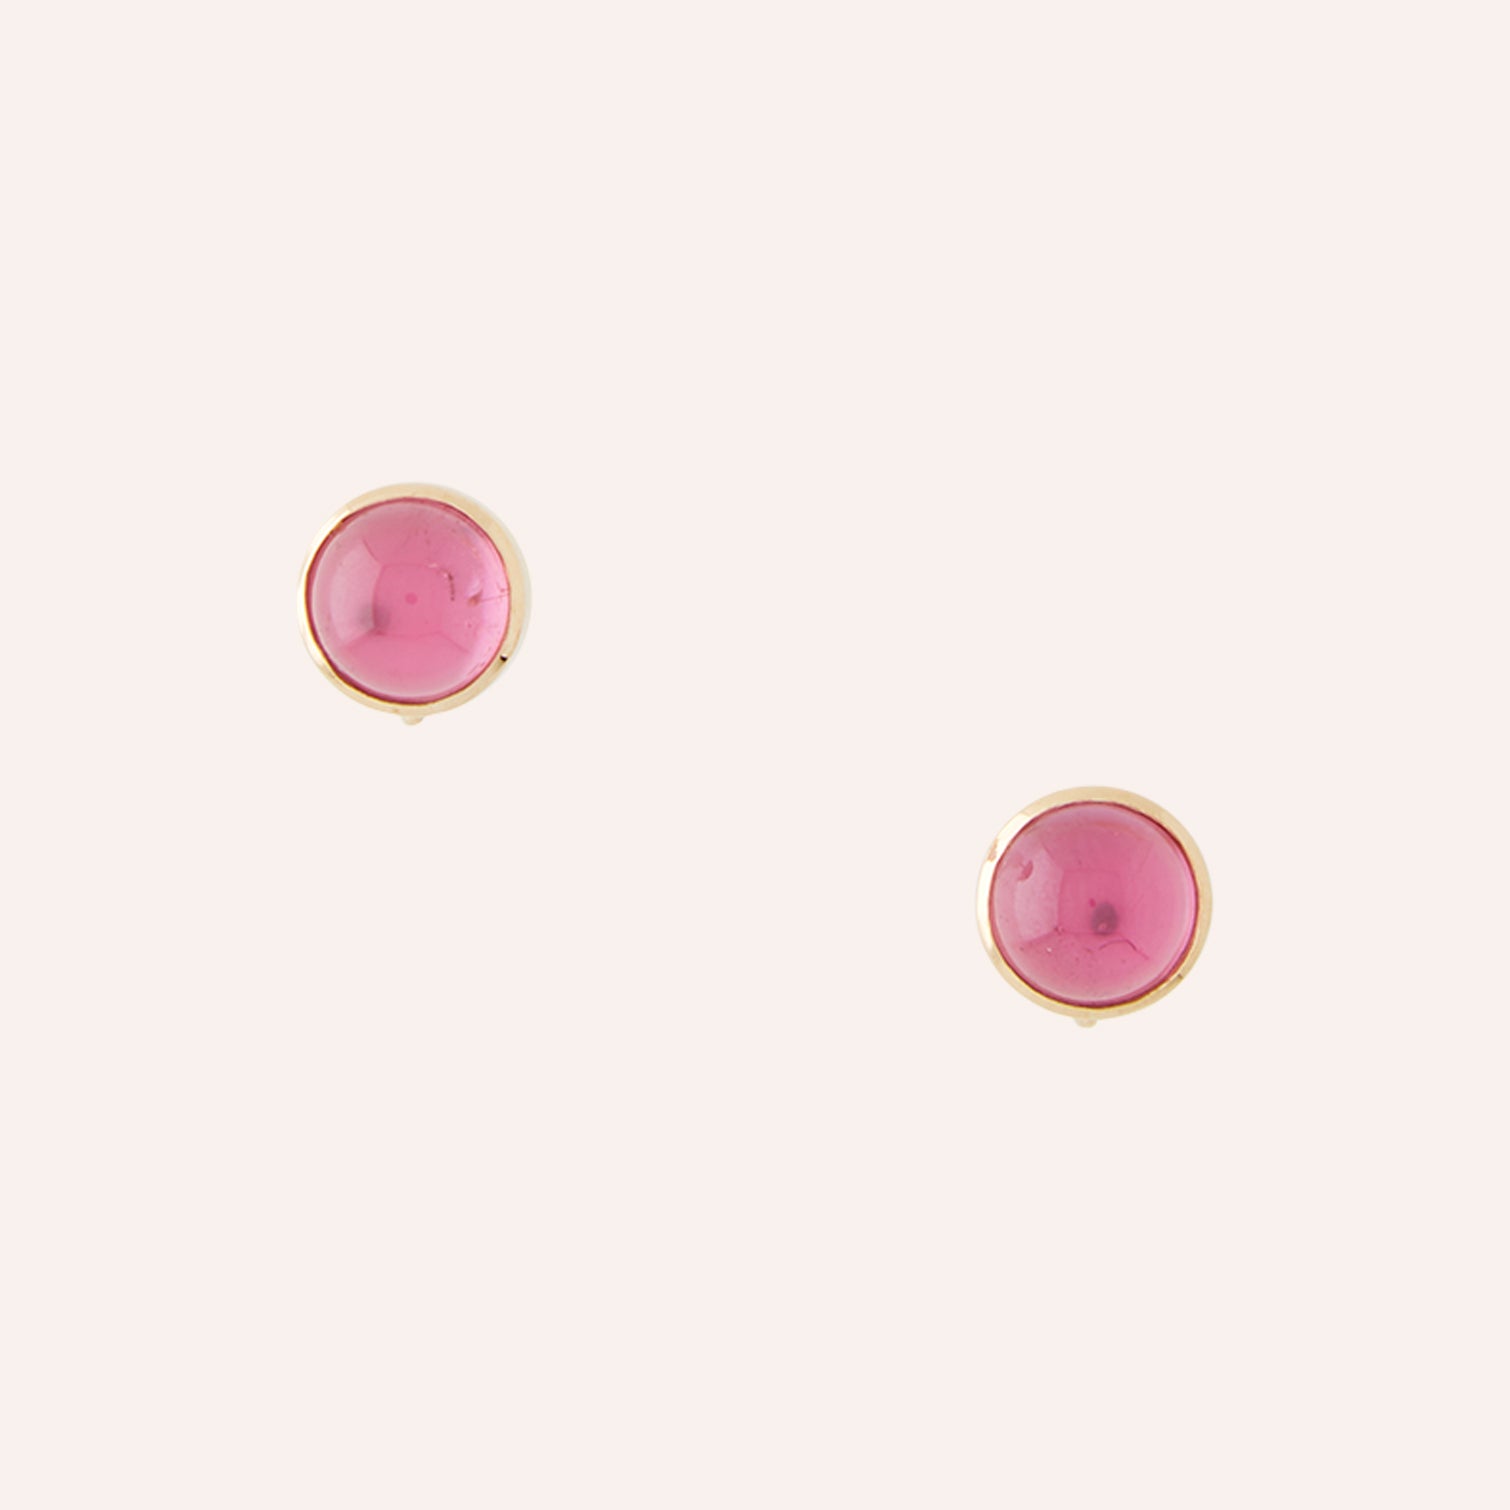 Candy Pink Rubellite Cabochon Earrings